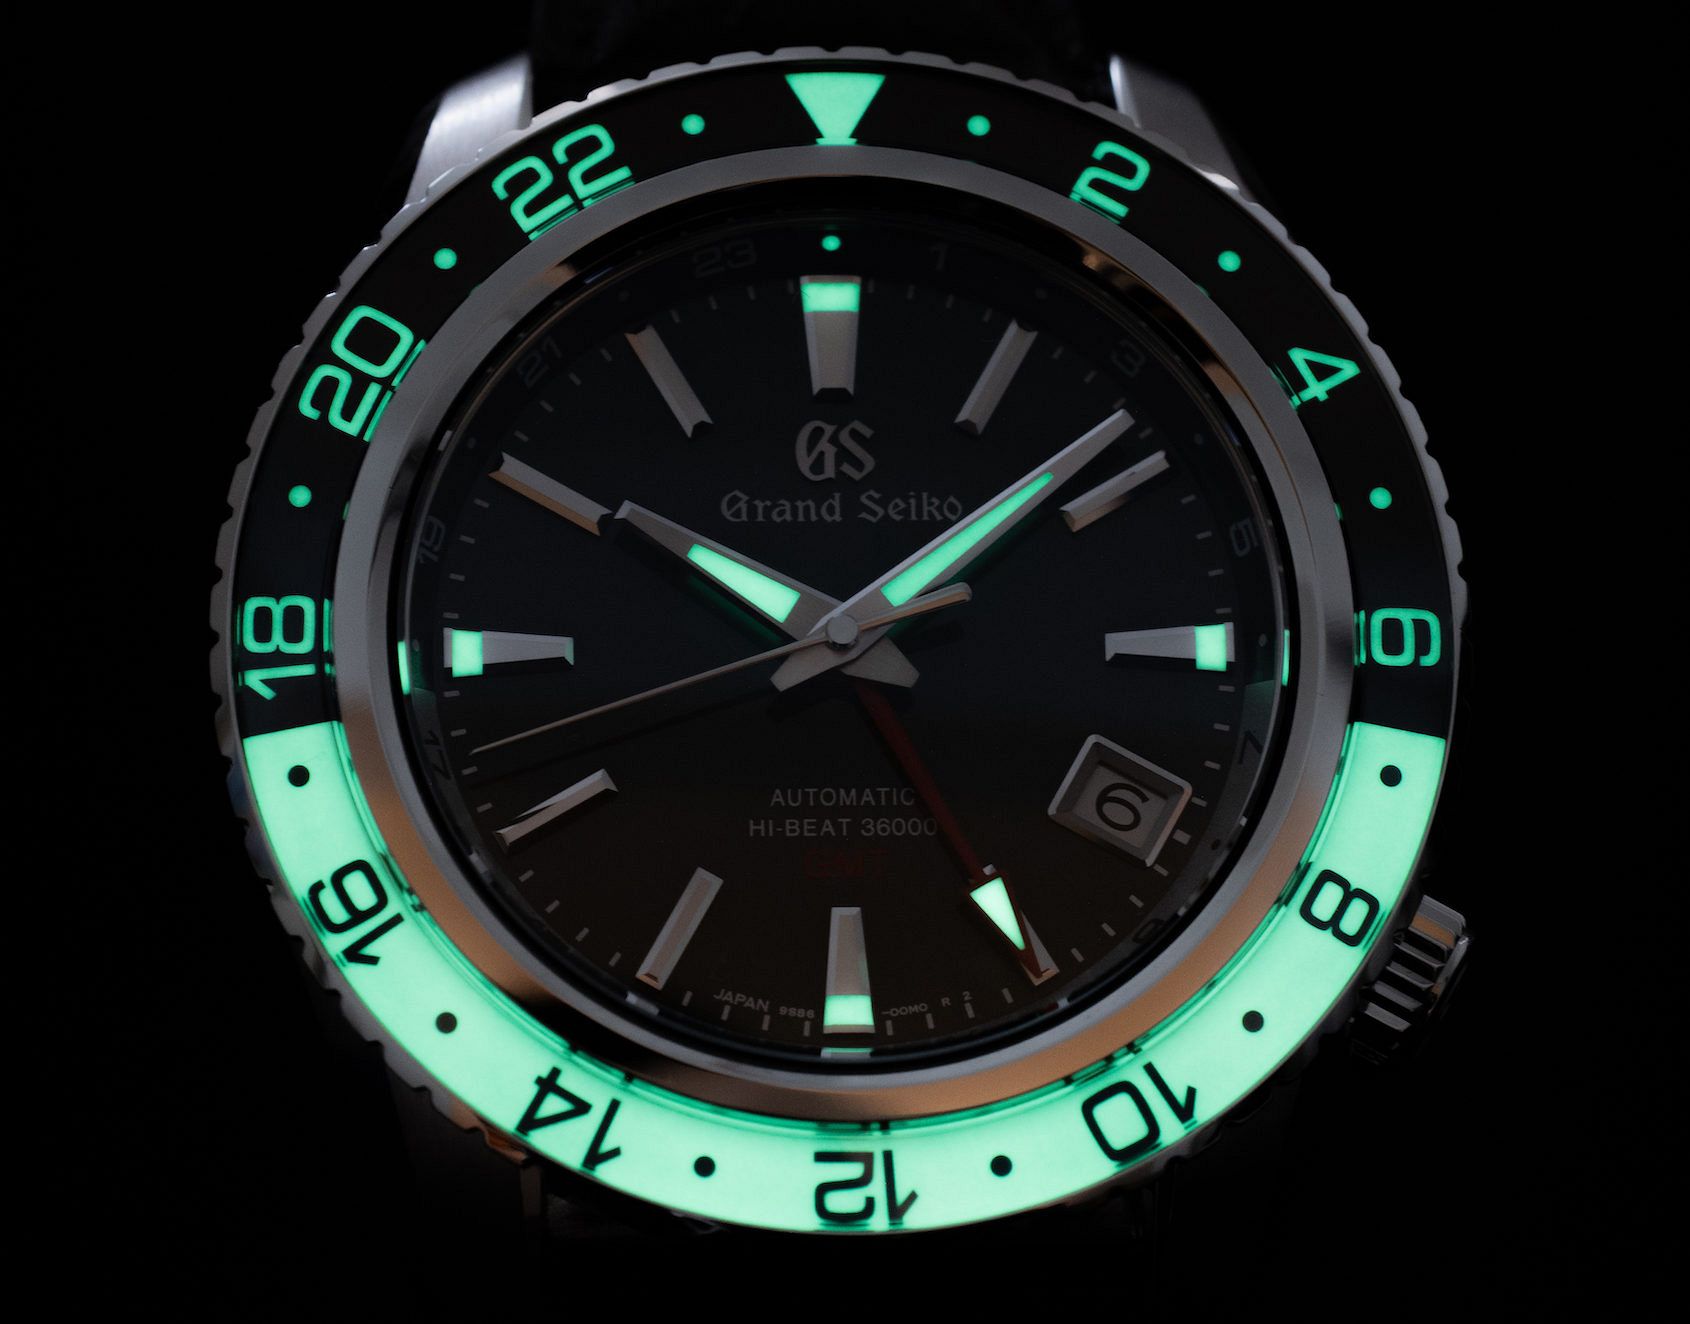 Who Dares Wins: Rolex teamed up with the SAS to create this unique Explorer II. Now you can buy it…